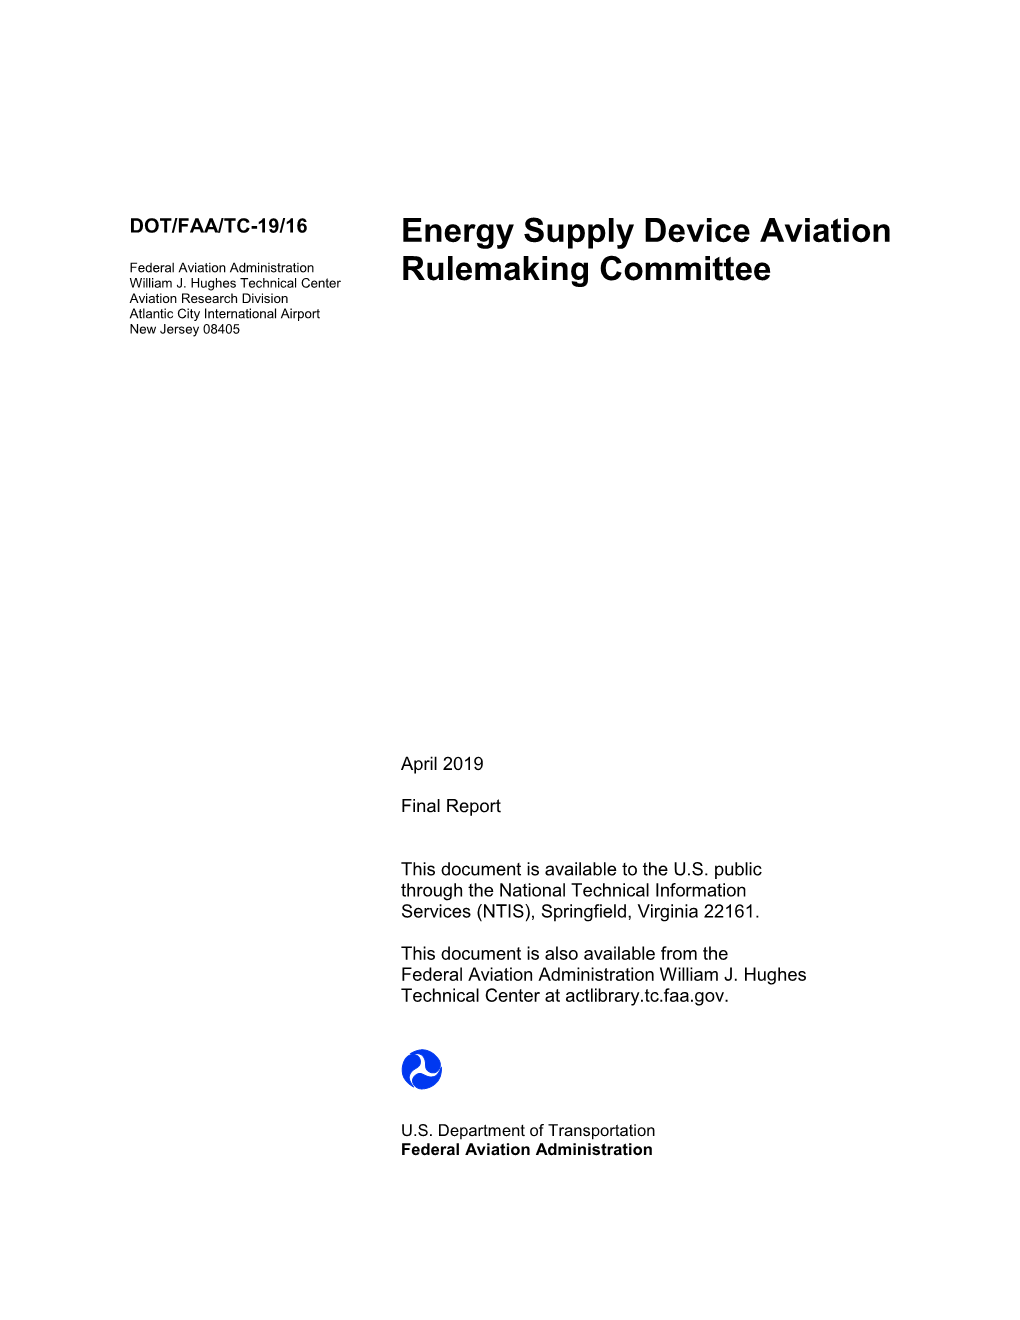 Energy Supply Device Aviation Rulemaking Committee